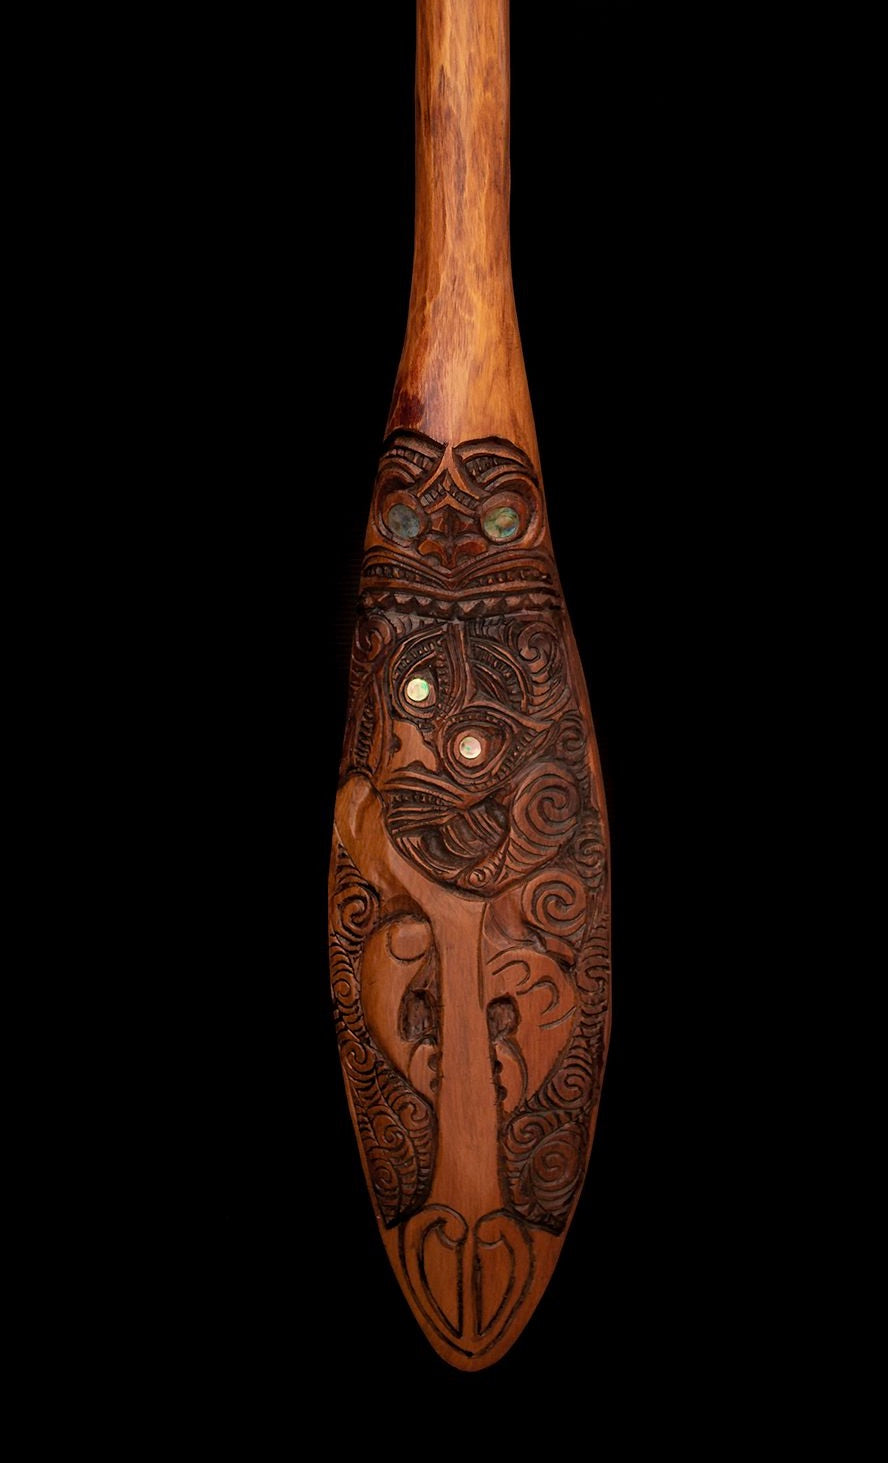 Detail of New Zealand Maori Waka Hoe Paddle Carving by Grant Holder Silver Fern Gallery